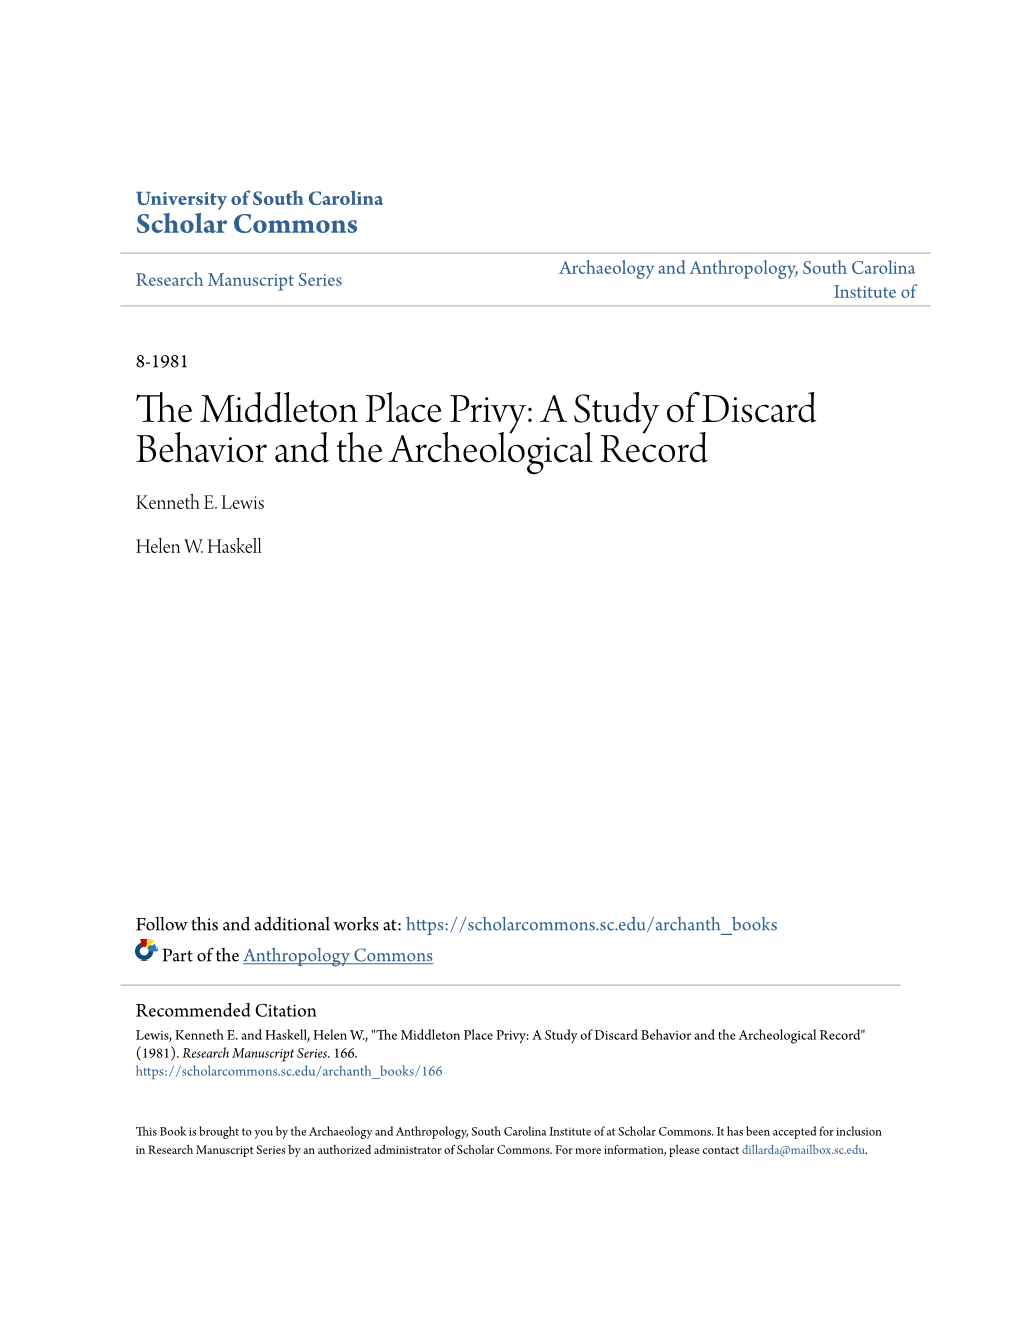 THE MIDDLETON PLACE PRIVY: a STUDY of DISCARD BEHAVIOR and the ARCHEOLOGICAL RECORD by Kenneth E